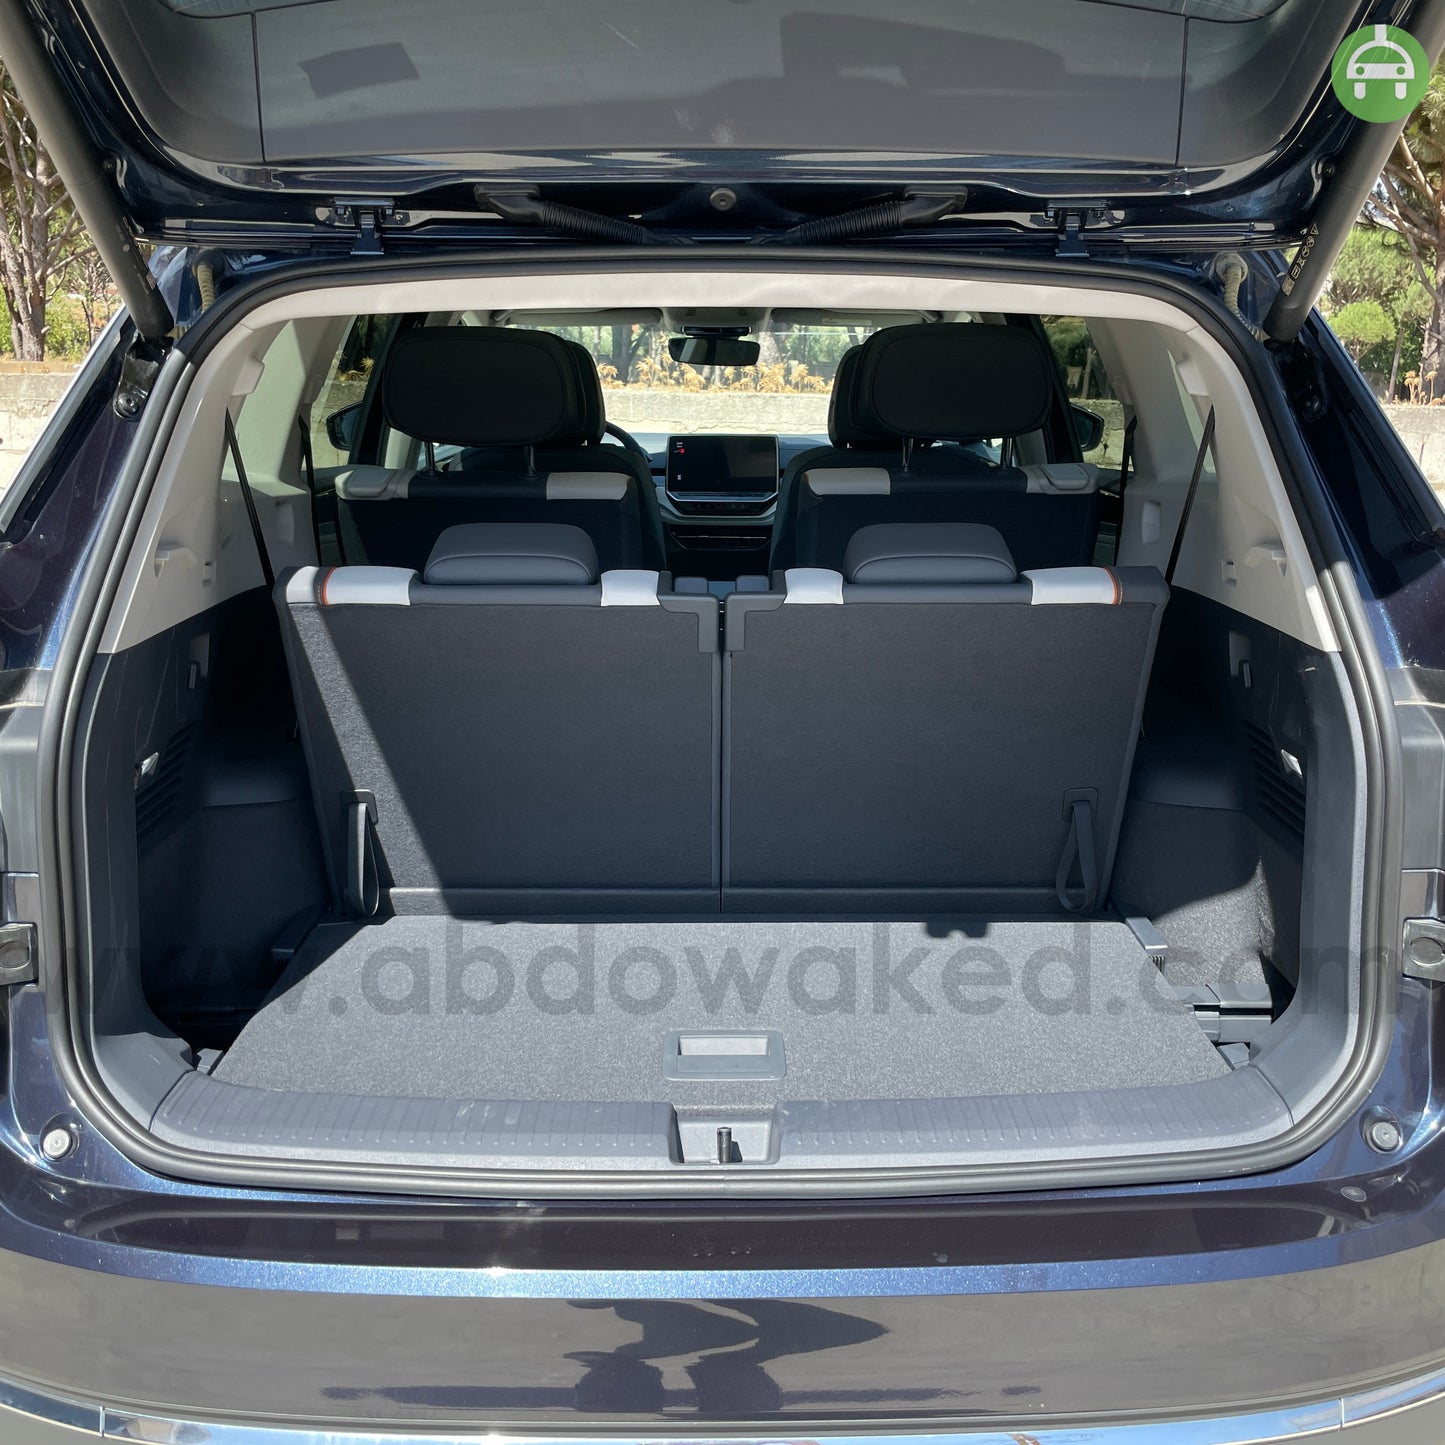 VW ID6 Crozz Pro VIP Edition 2022 6-Seater Dark Blue Color 600km Range/Charge Fully Electric Car (New - 0KM)